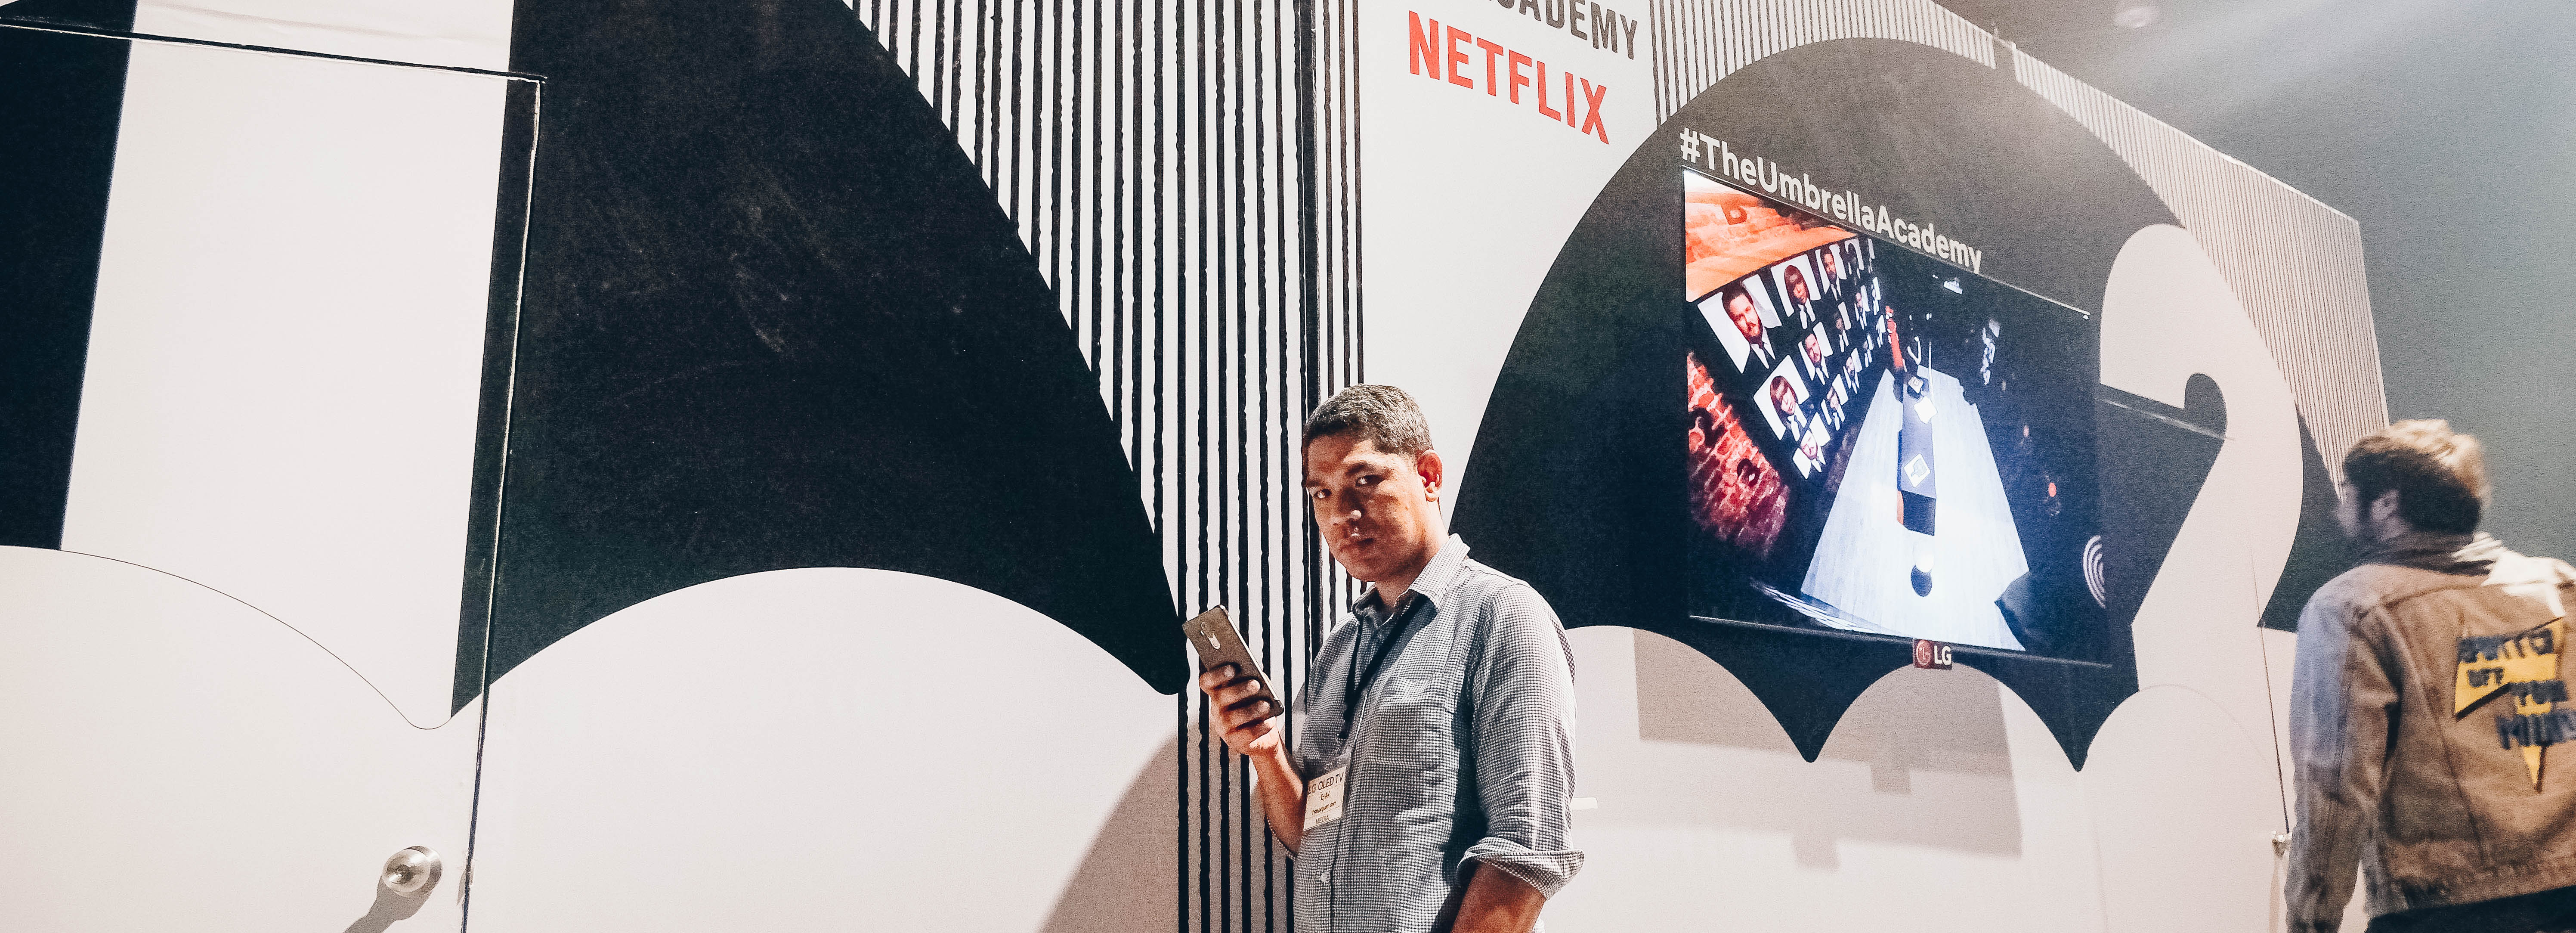 LG Powers up Netflix’s The Umbrella Academy Launch Party